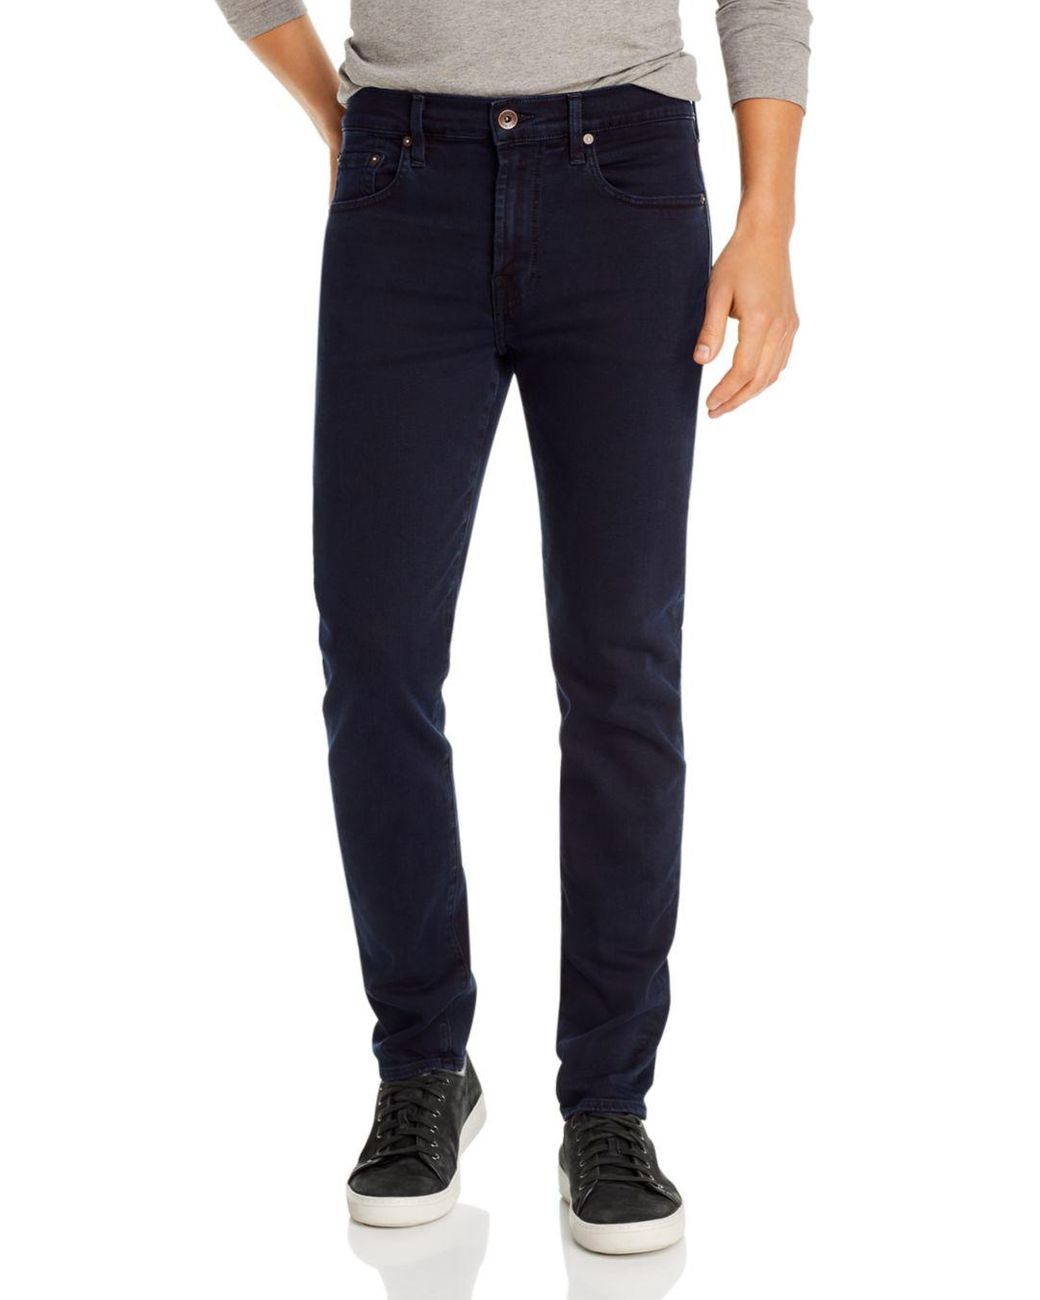 7 for all mankind adrien luxe sport